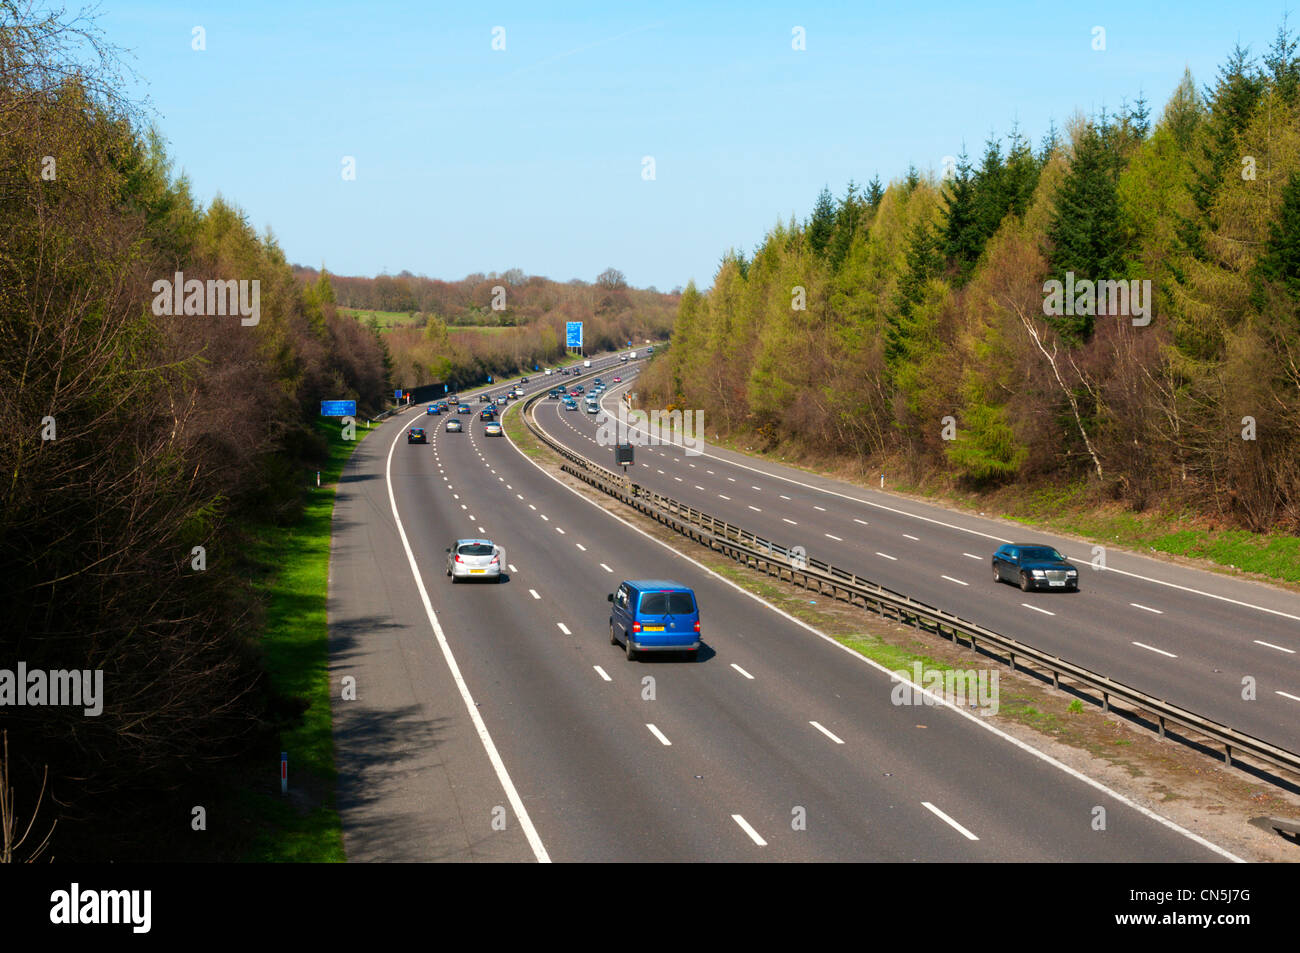 The M25 motorway in a cutting through woodland to the south east of London. View northbound parallel to Darent Valley in Kent. Stock Photo